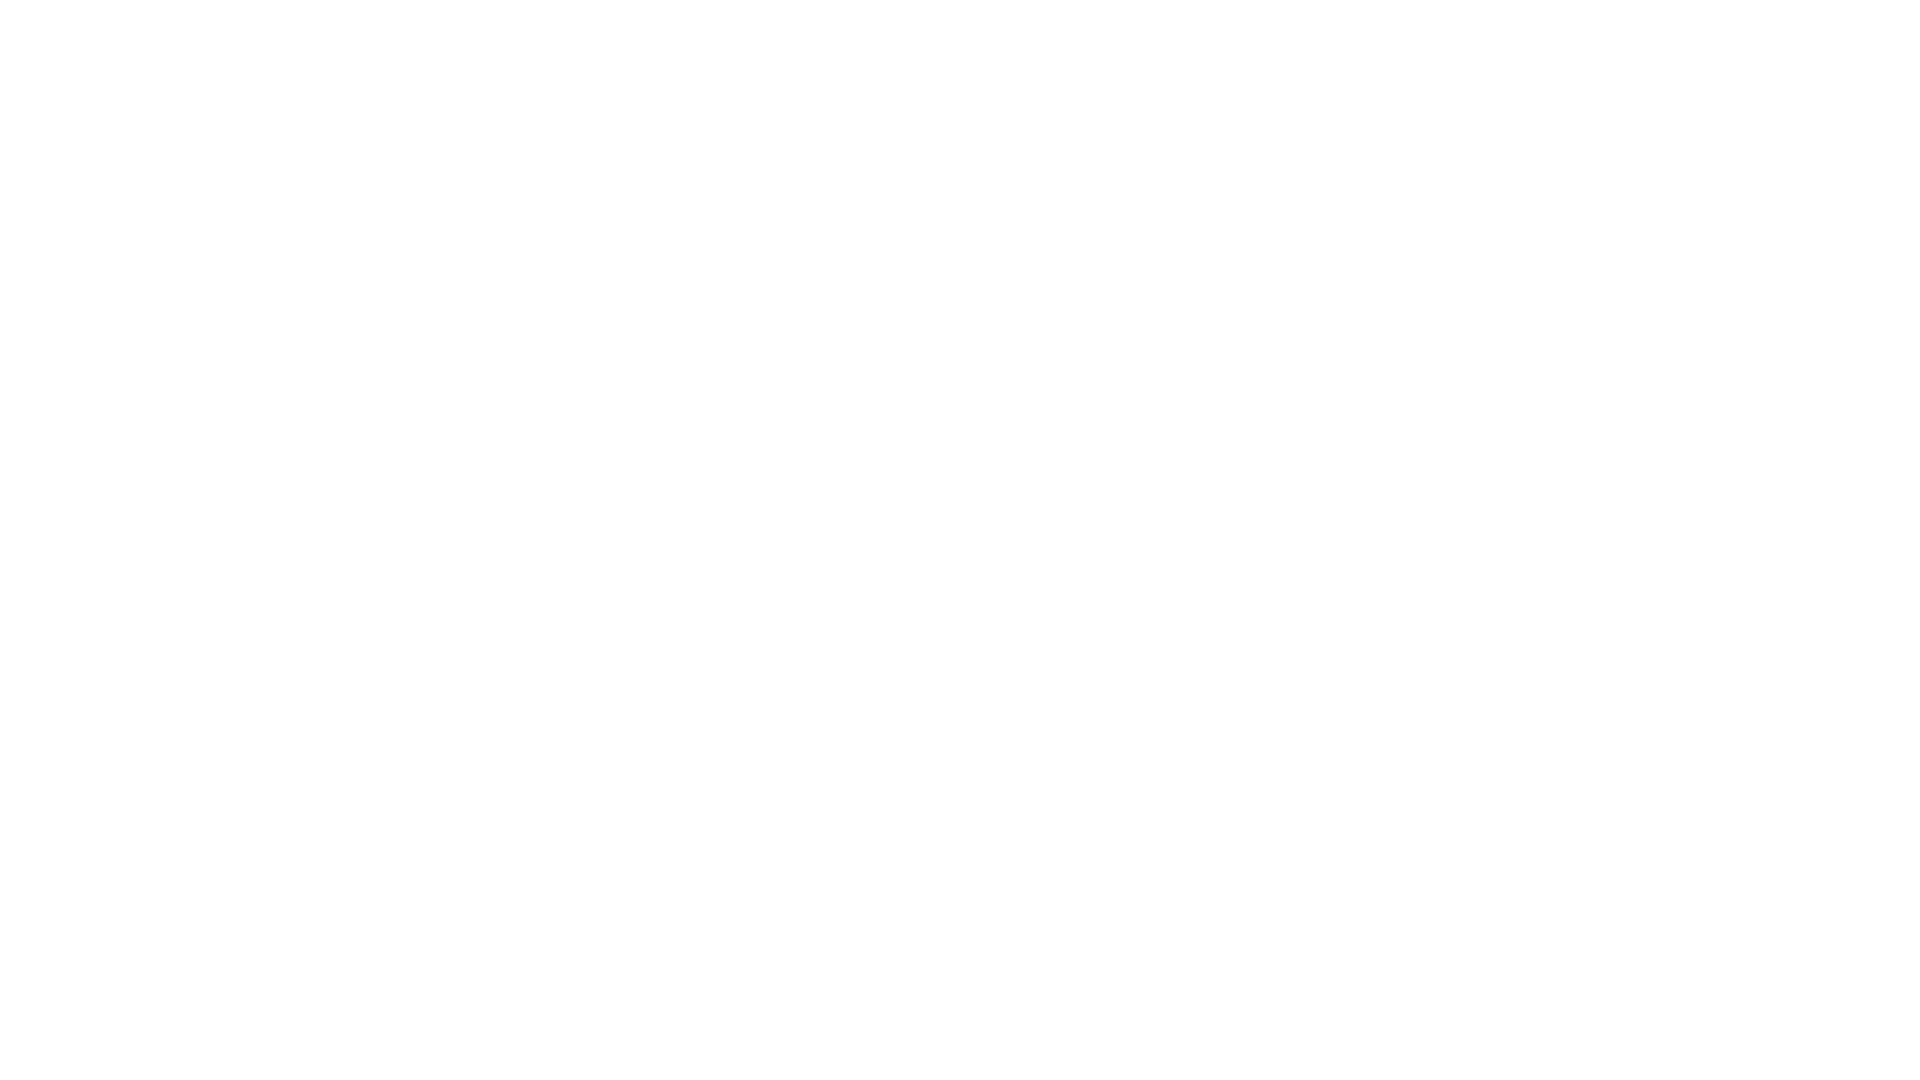 Residences-By-The-Fives-02